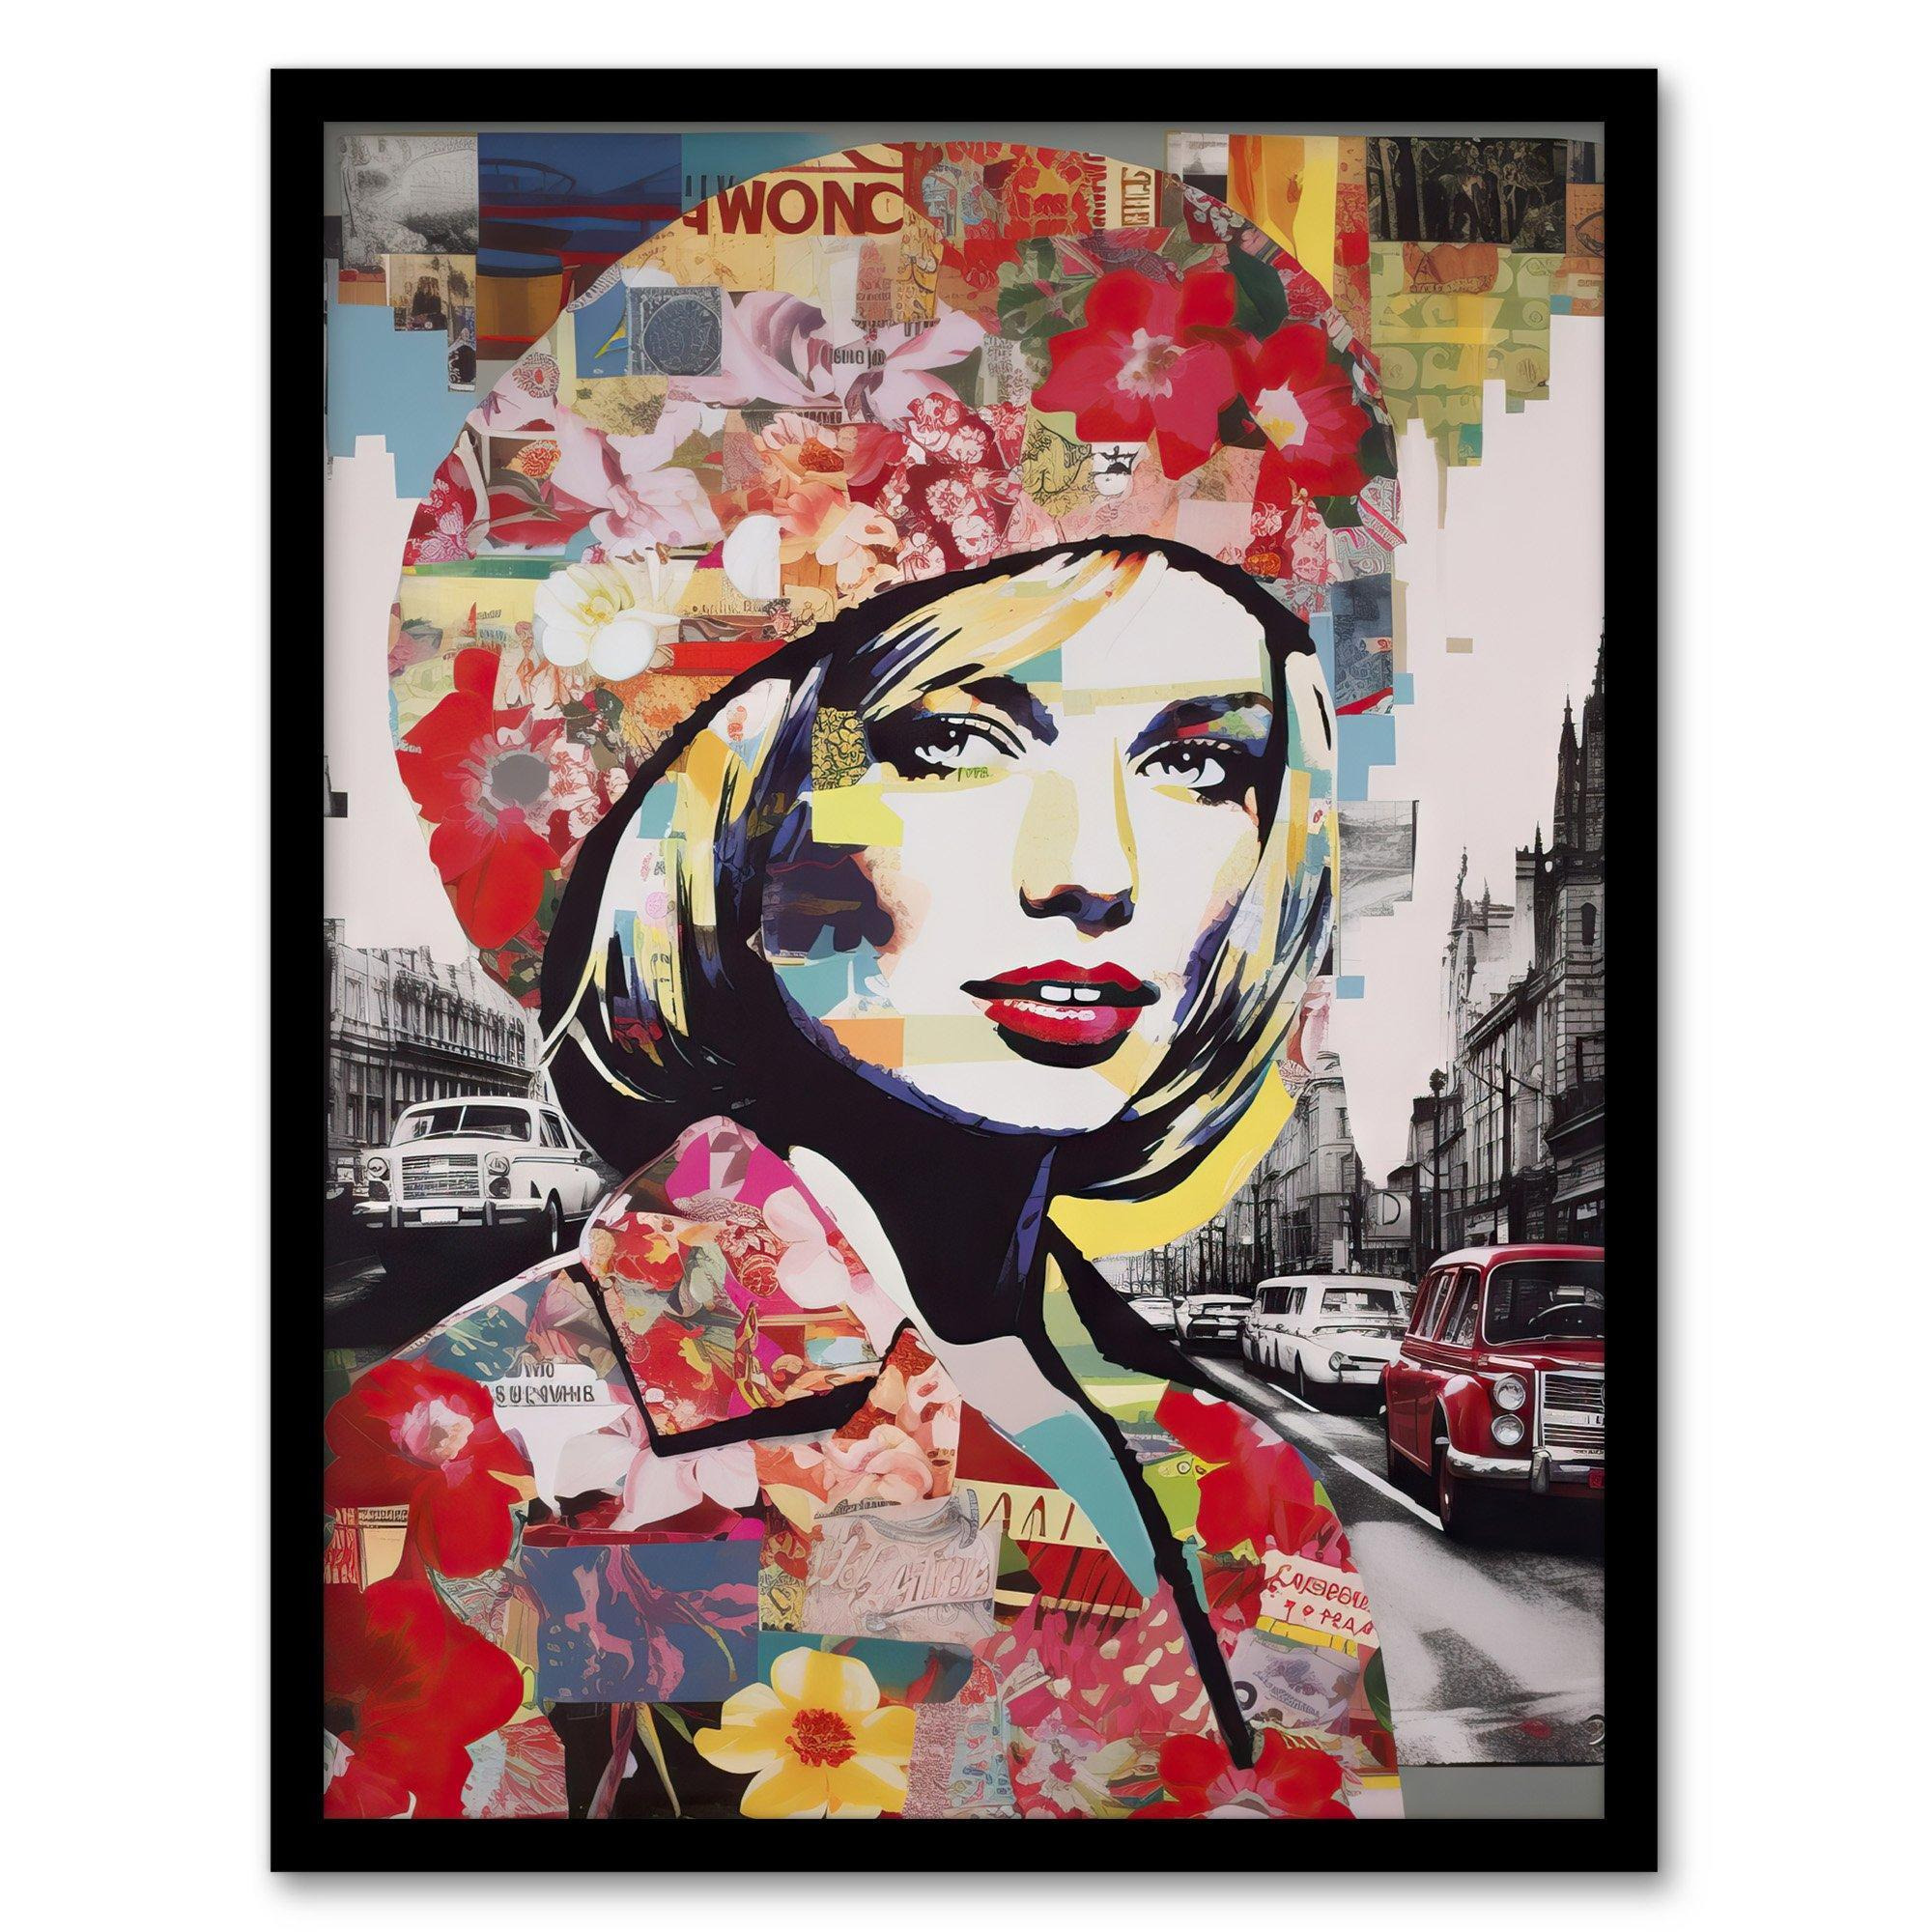 Wall Art Print London Floral Fashion Retro Advert Collage Artwork Woman Portrait In Busy Street Vibrant Colourful Bold Pop Art Modern Painting Art Framed - image 1